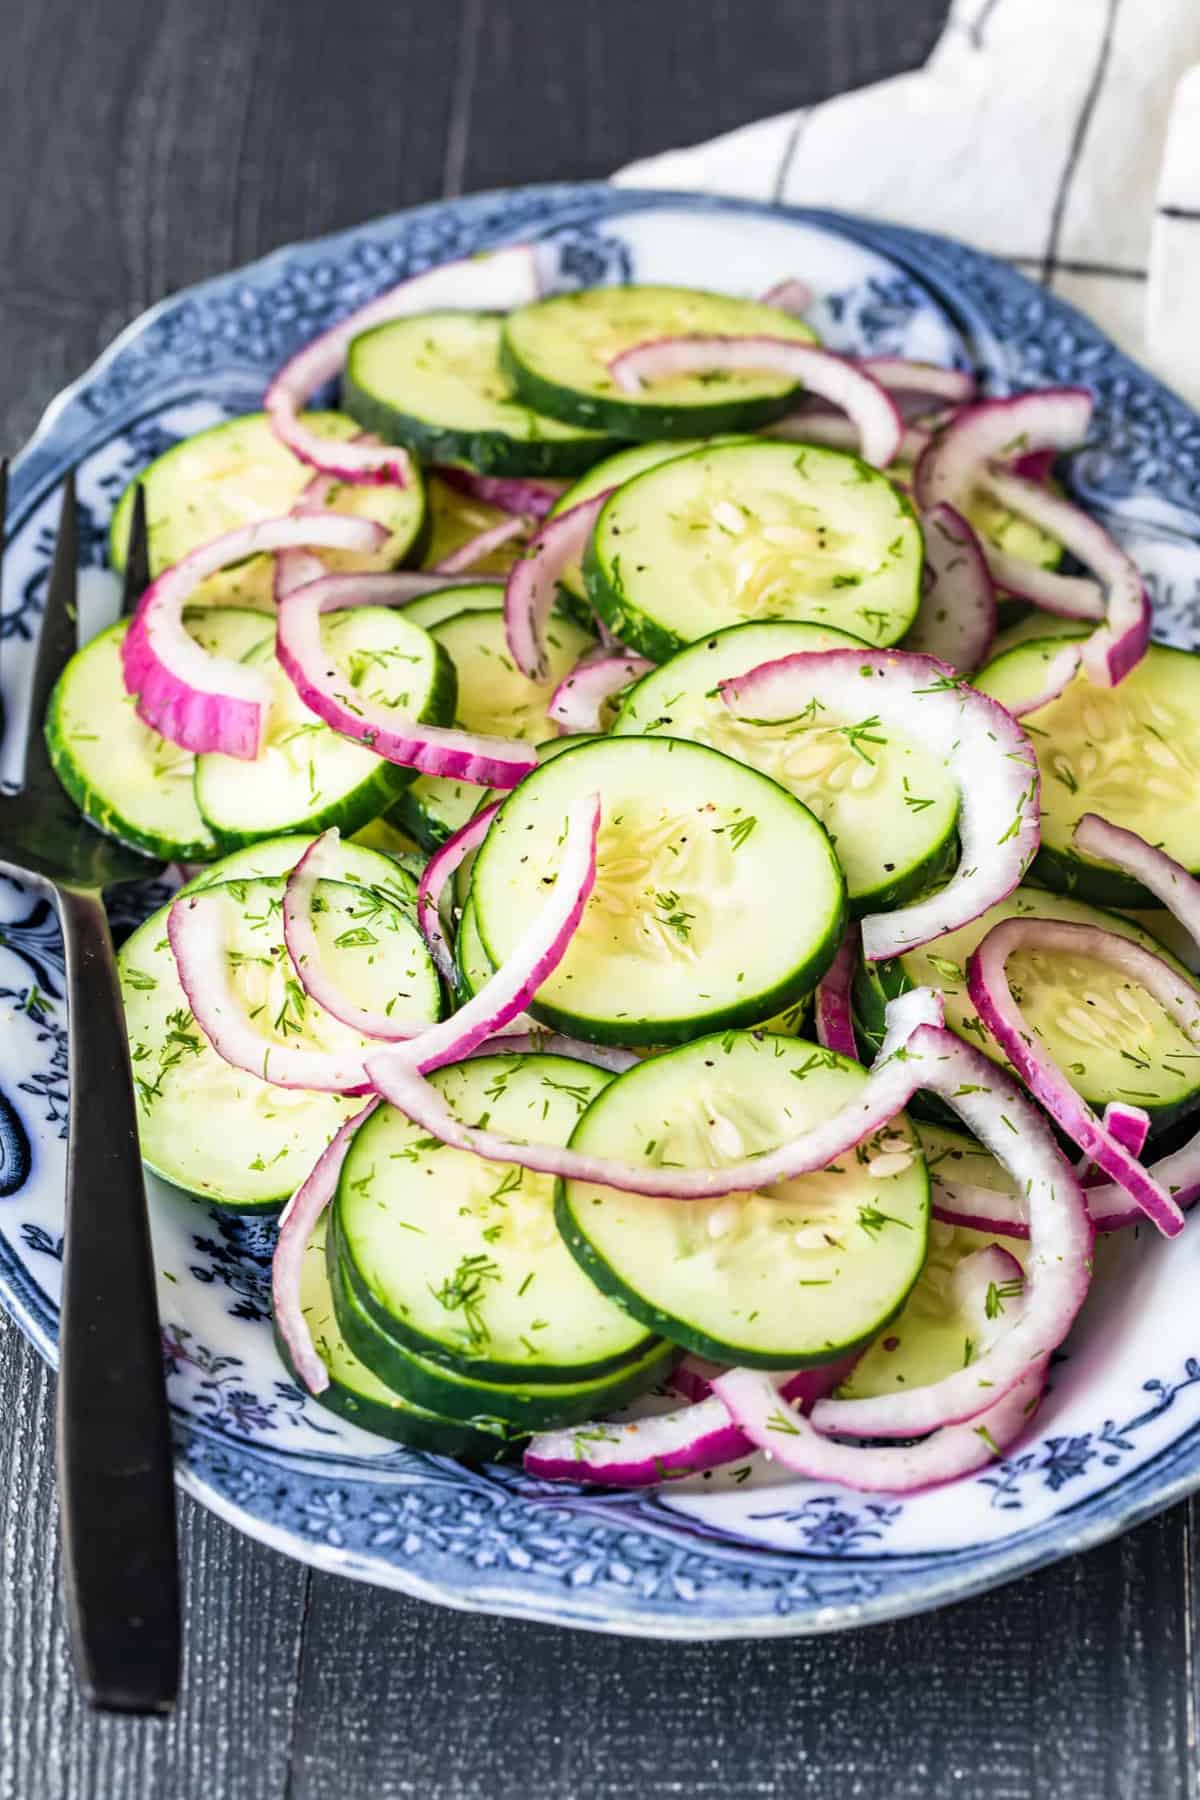 Cucumber salad with red onions on a blue and white serving plate